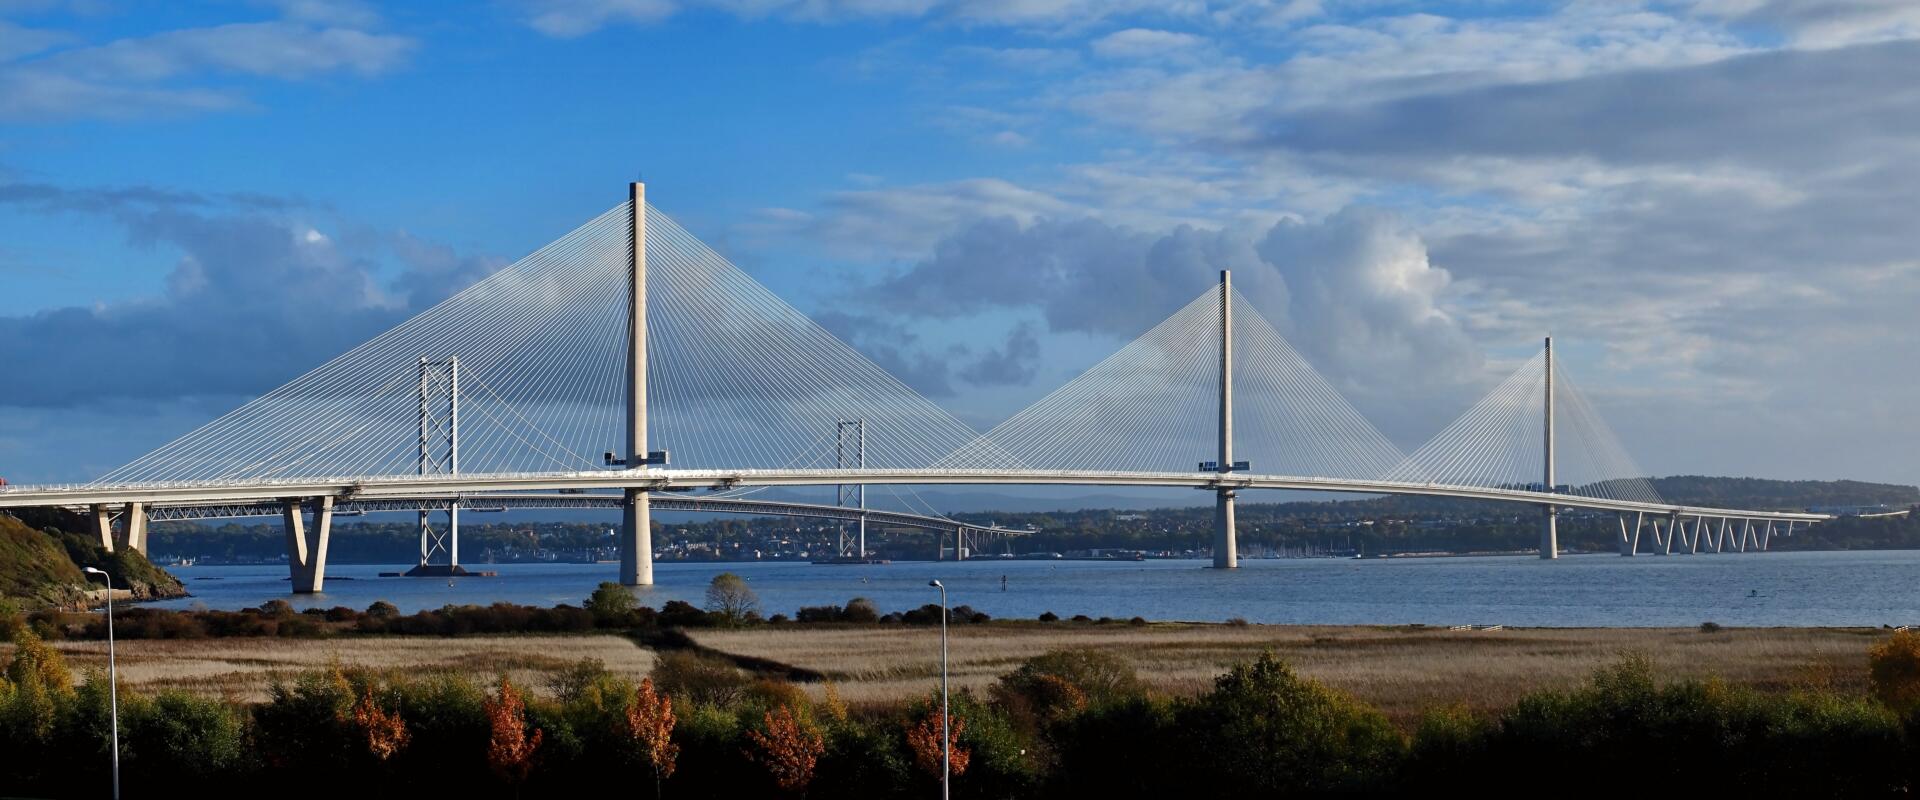 Case study: Icing forecasts for the Queensferry Crossing bridge in Scotland